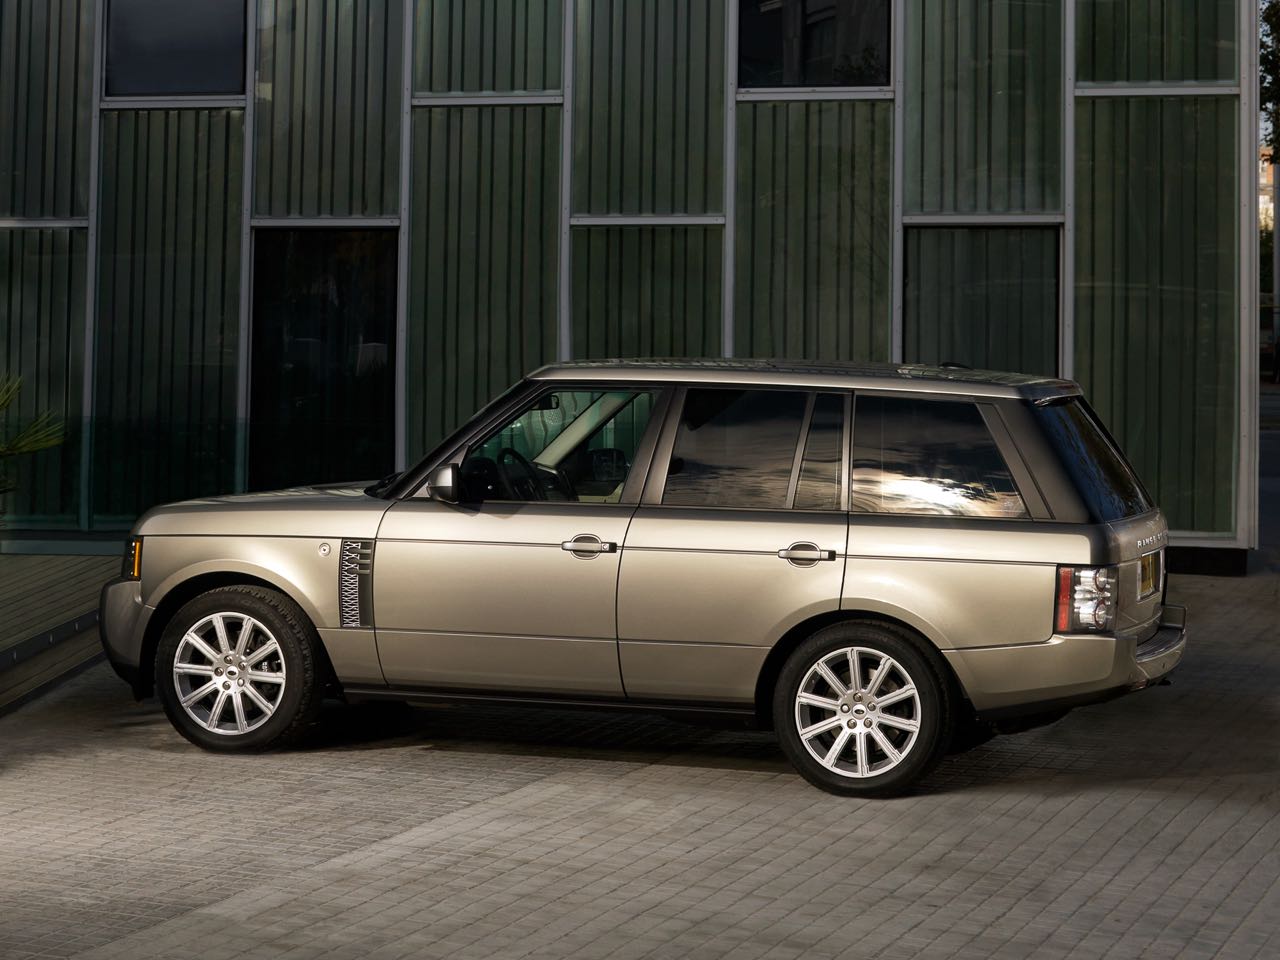 Range Rover 2009 lateral